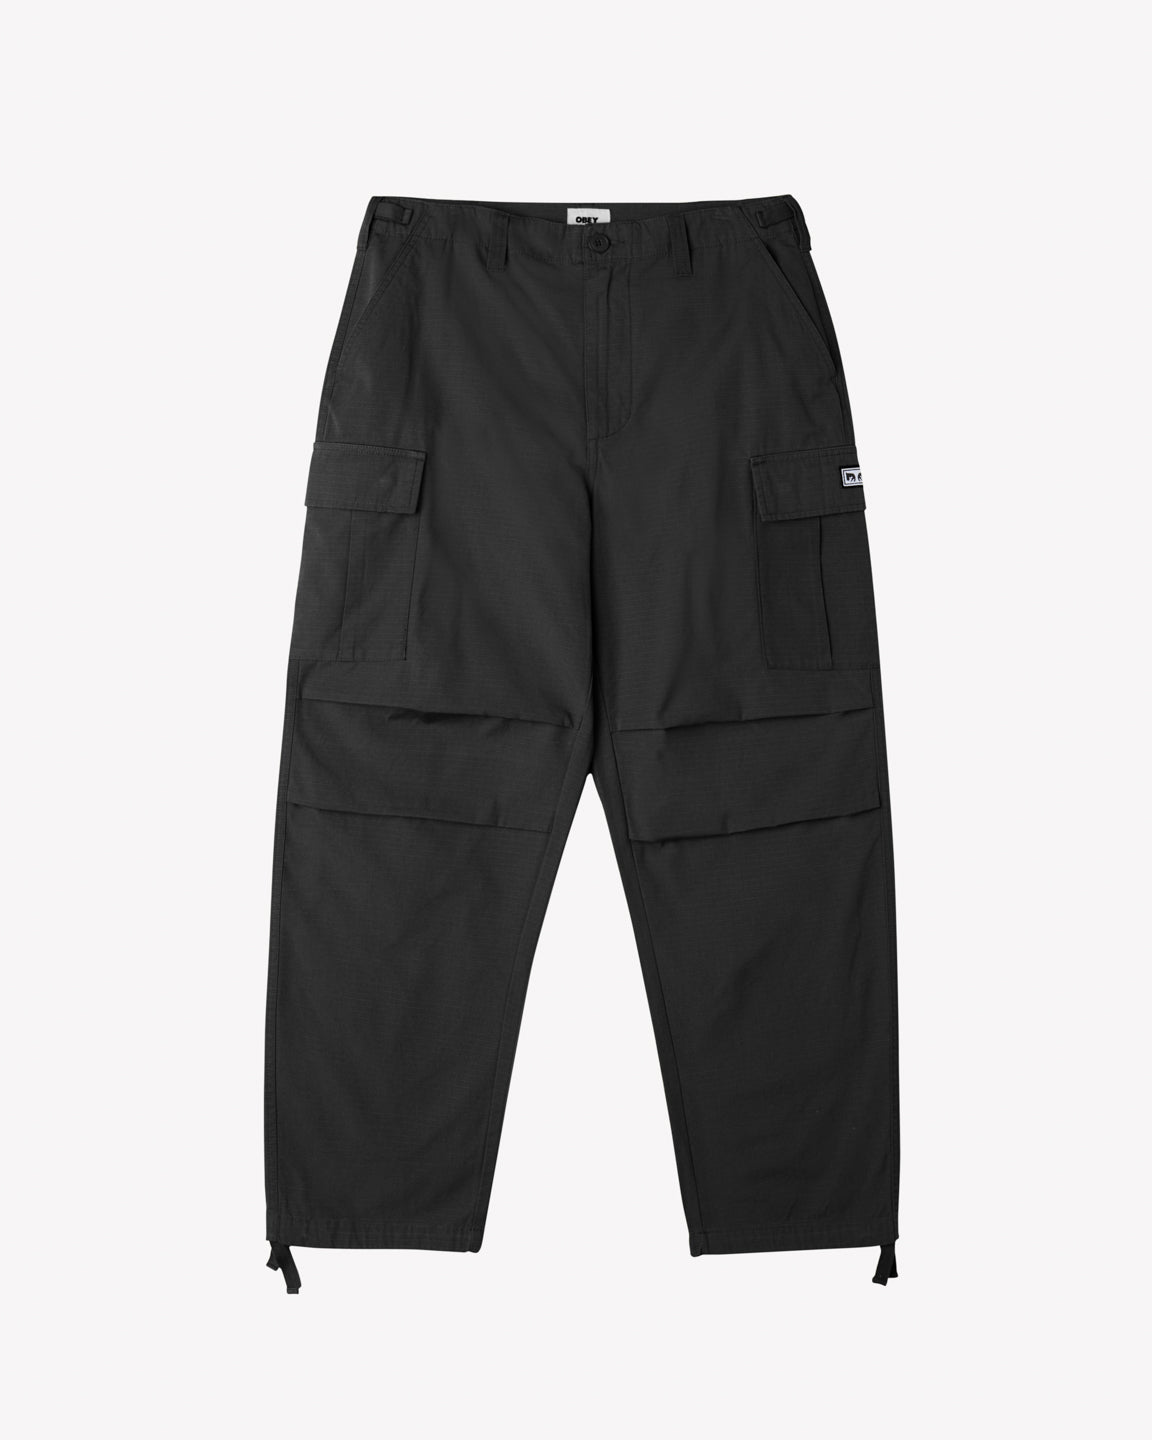 Obey Big Division Cargo Straight Leg Pants 26